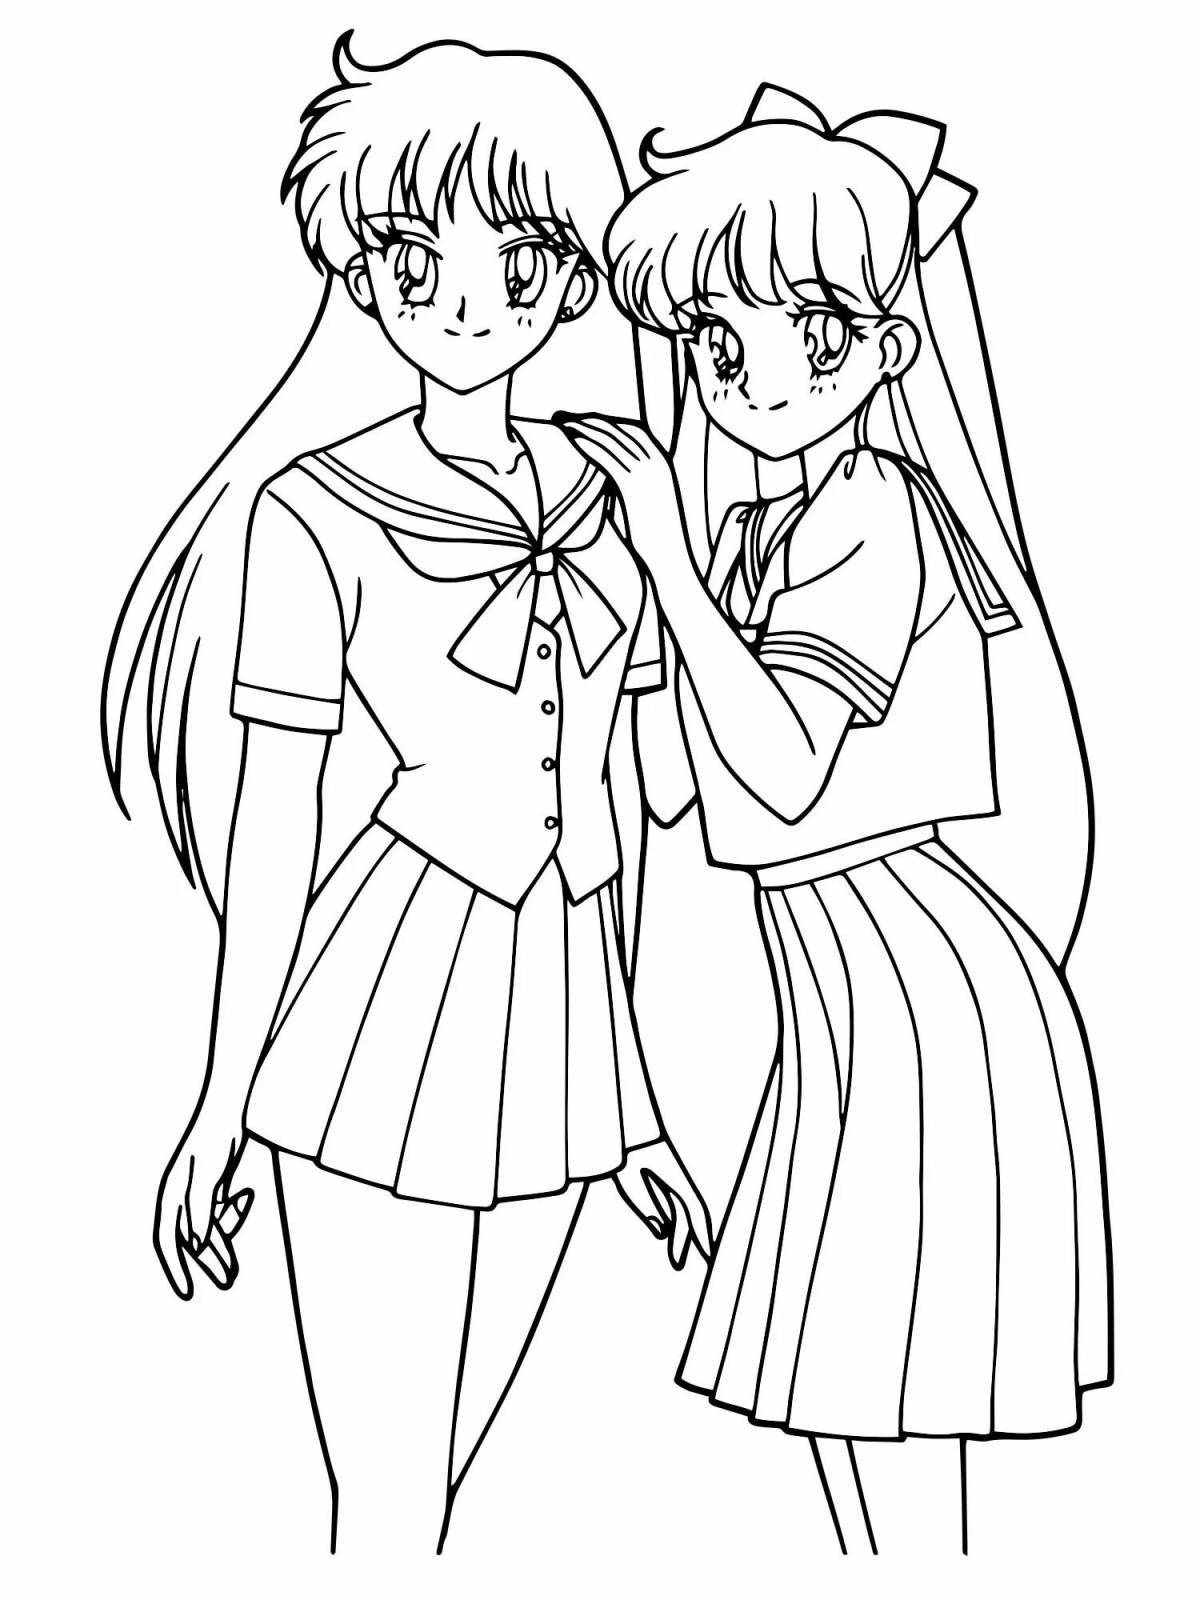 Glorious anime girlfriends coloring pages